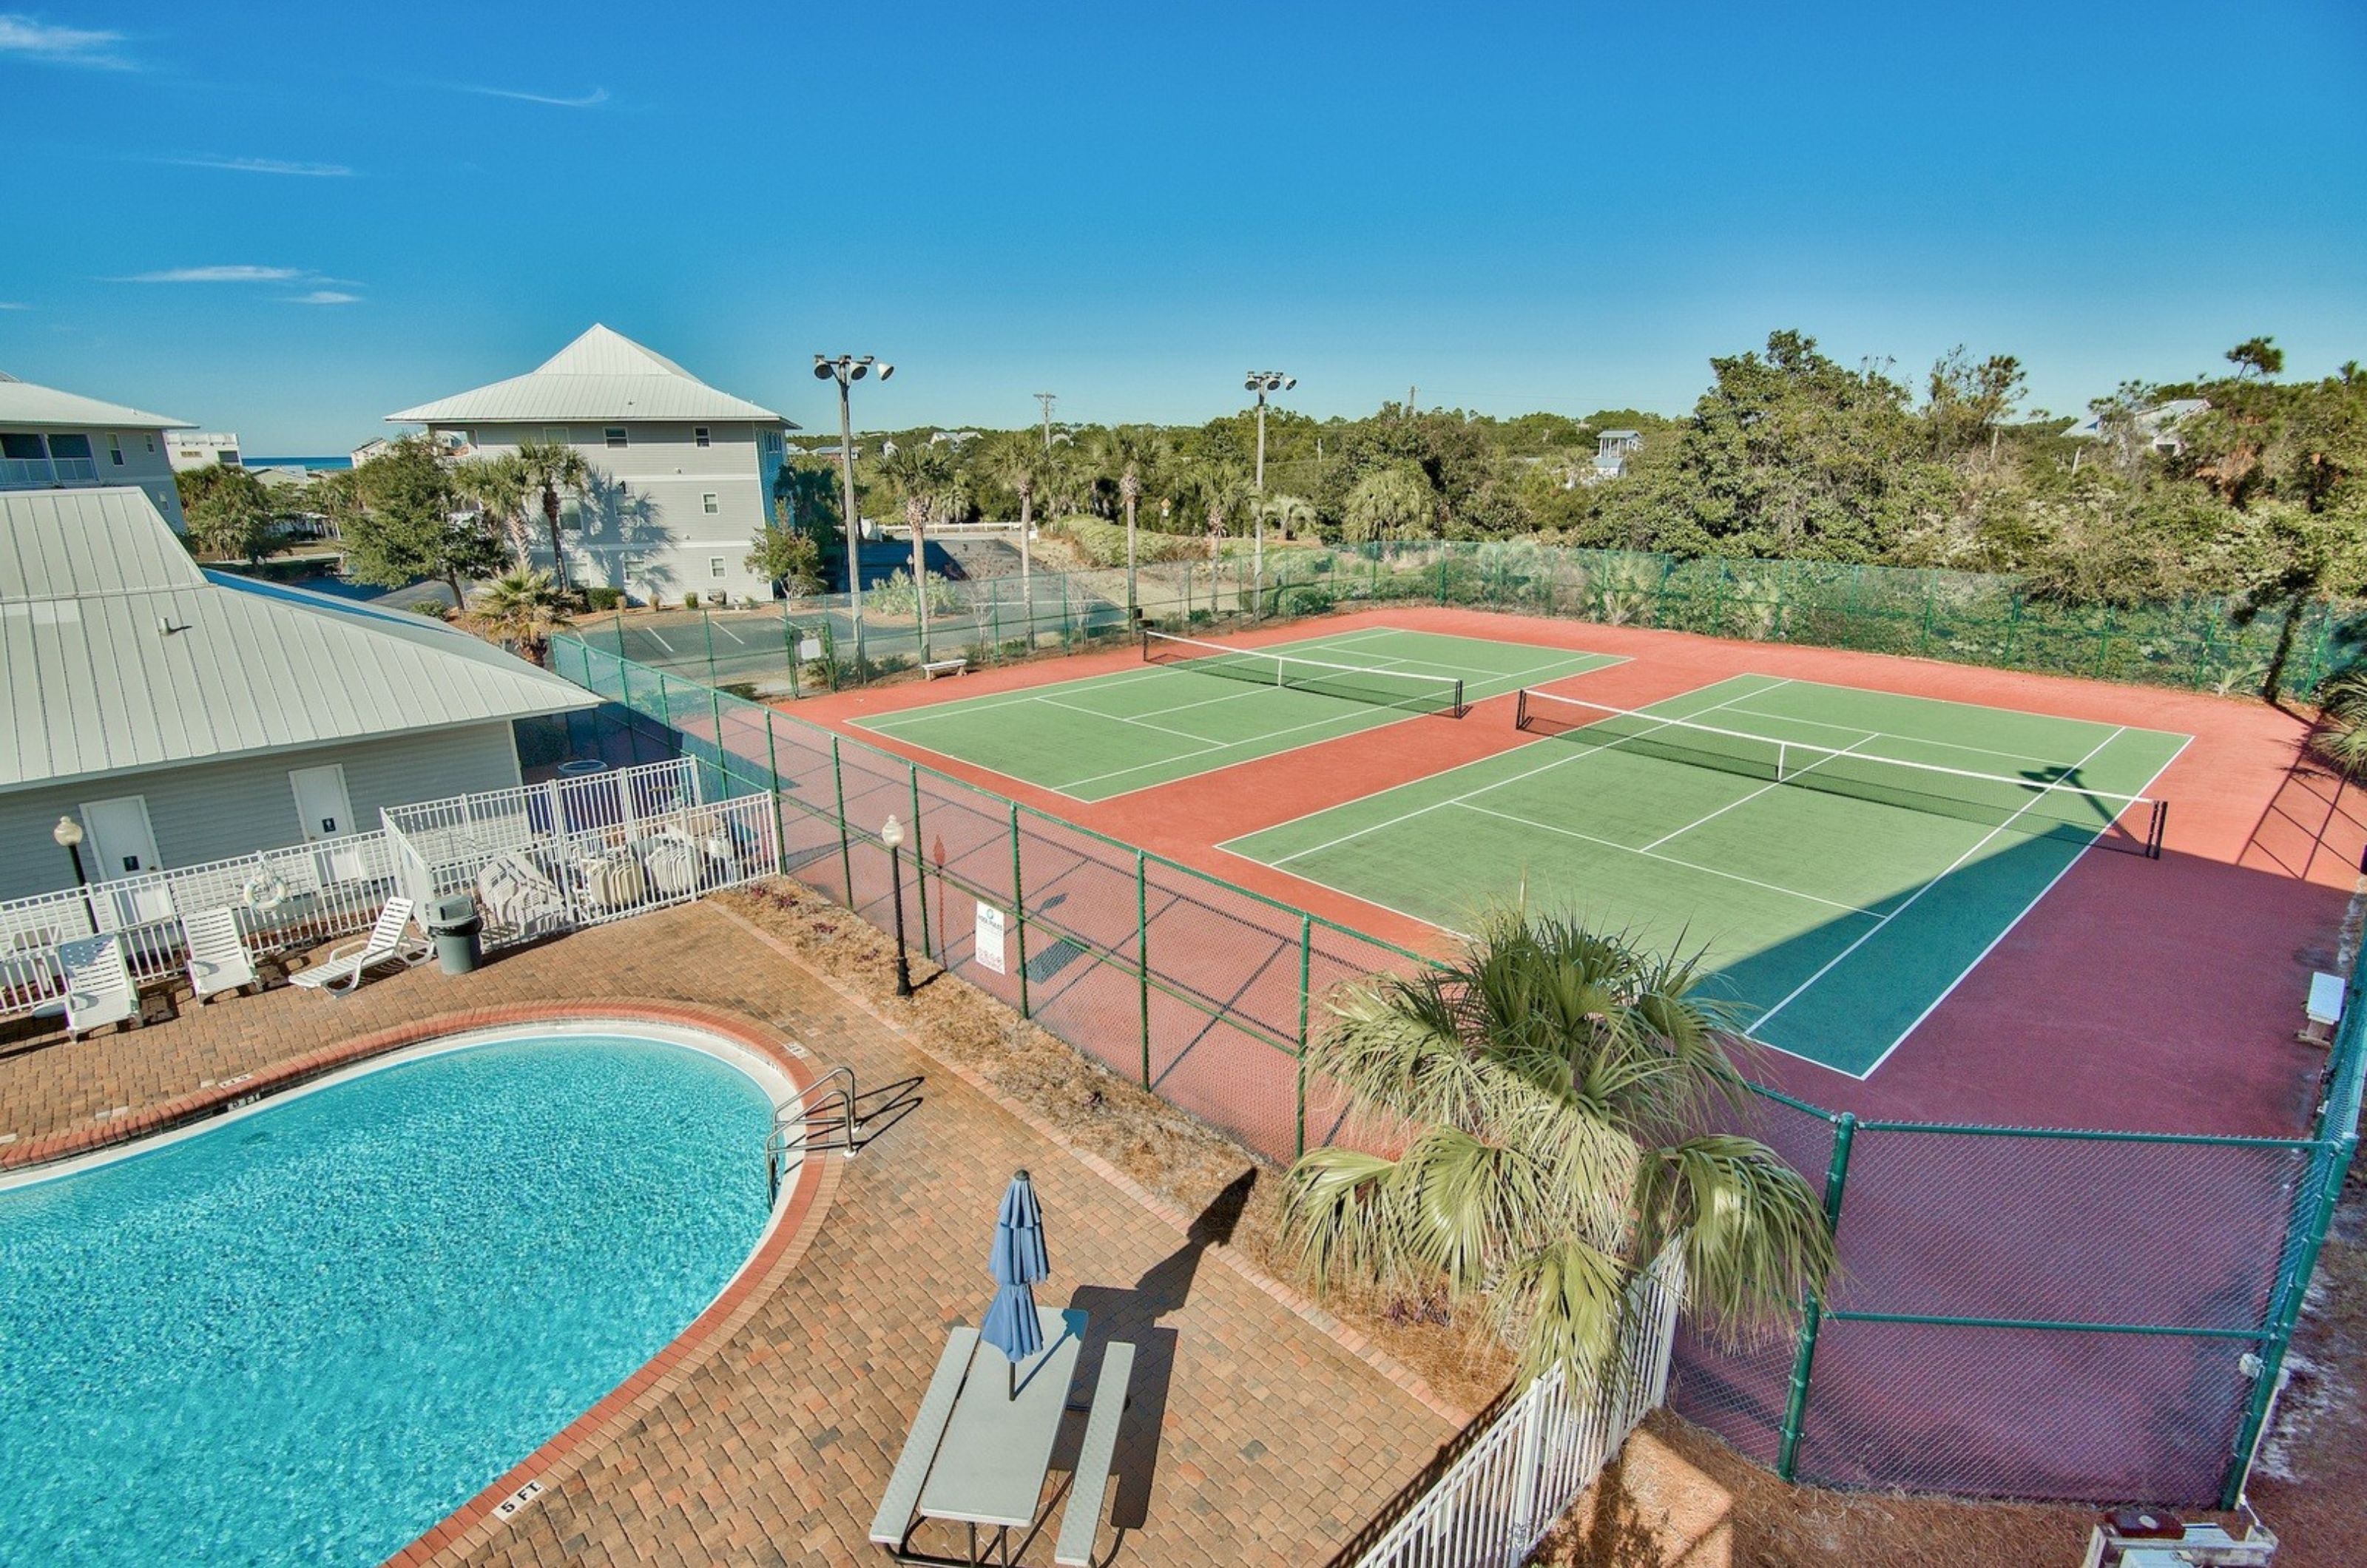 Aerial view of the outdoor tennis courts next to the clubhouse and swimming pool at Beachside Villas